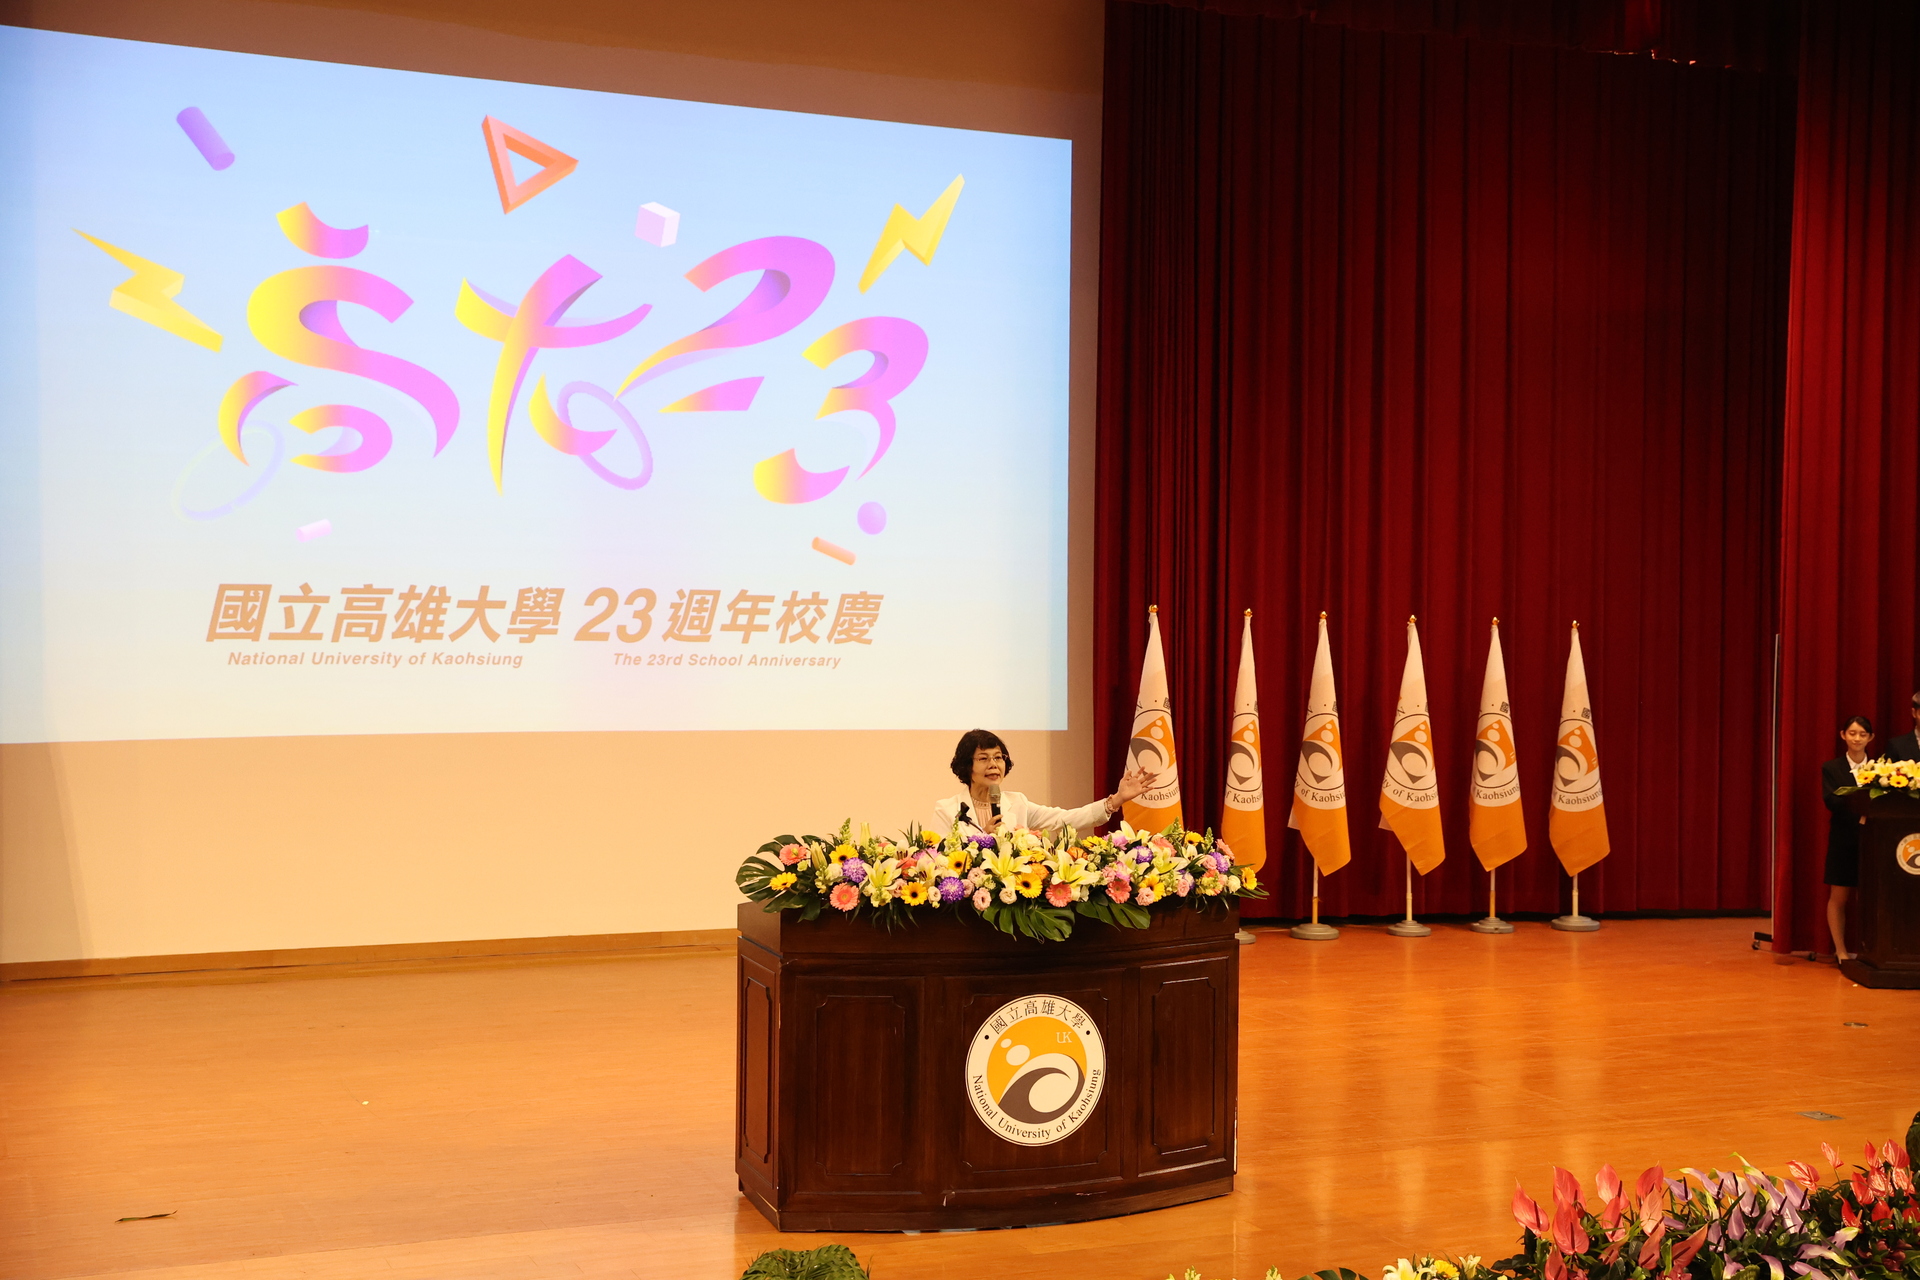 The president of NUK, Yueh-Tuan Chen gave a speech on the School Anniversary of NUK 01